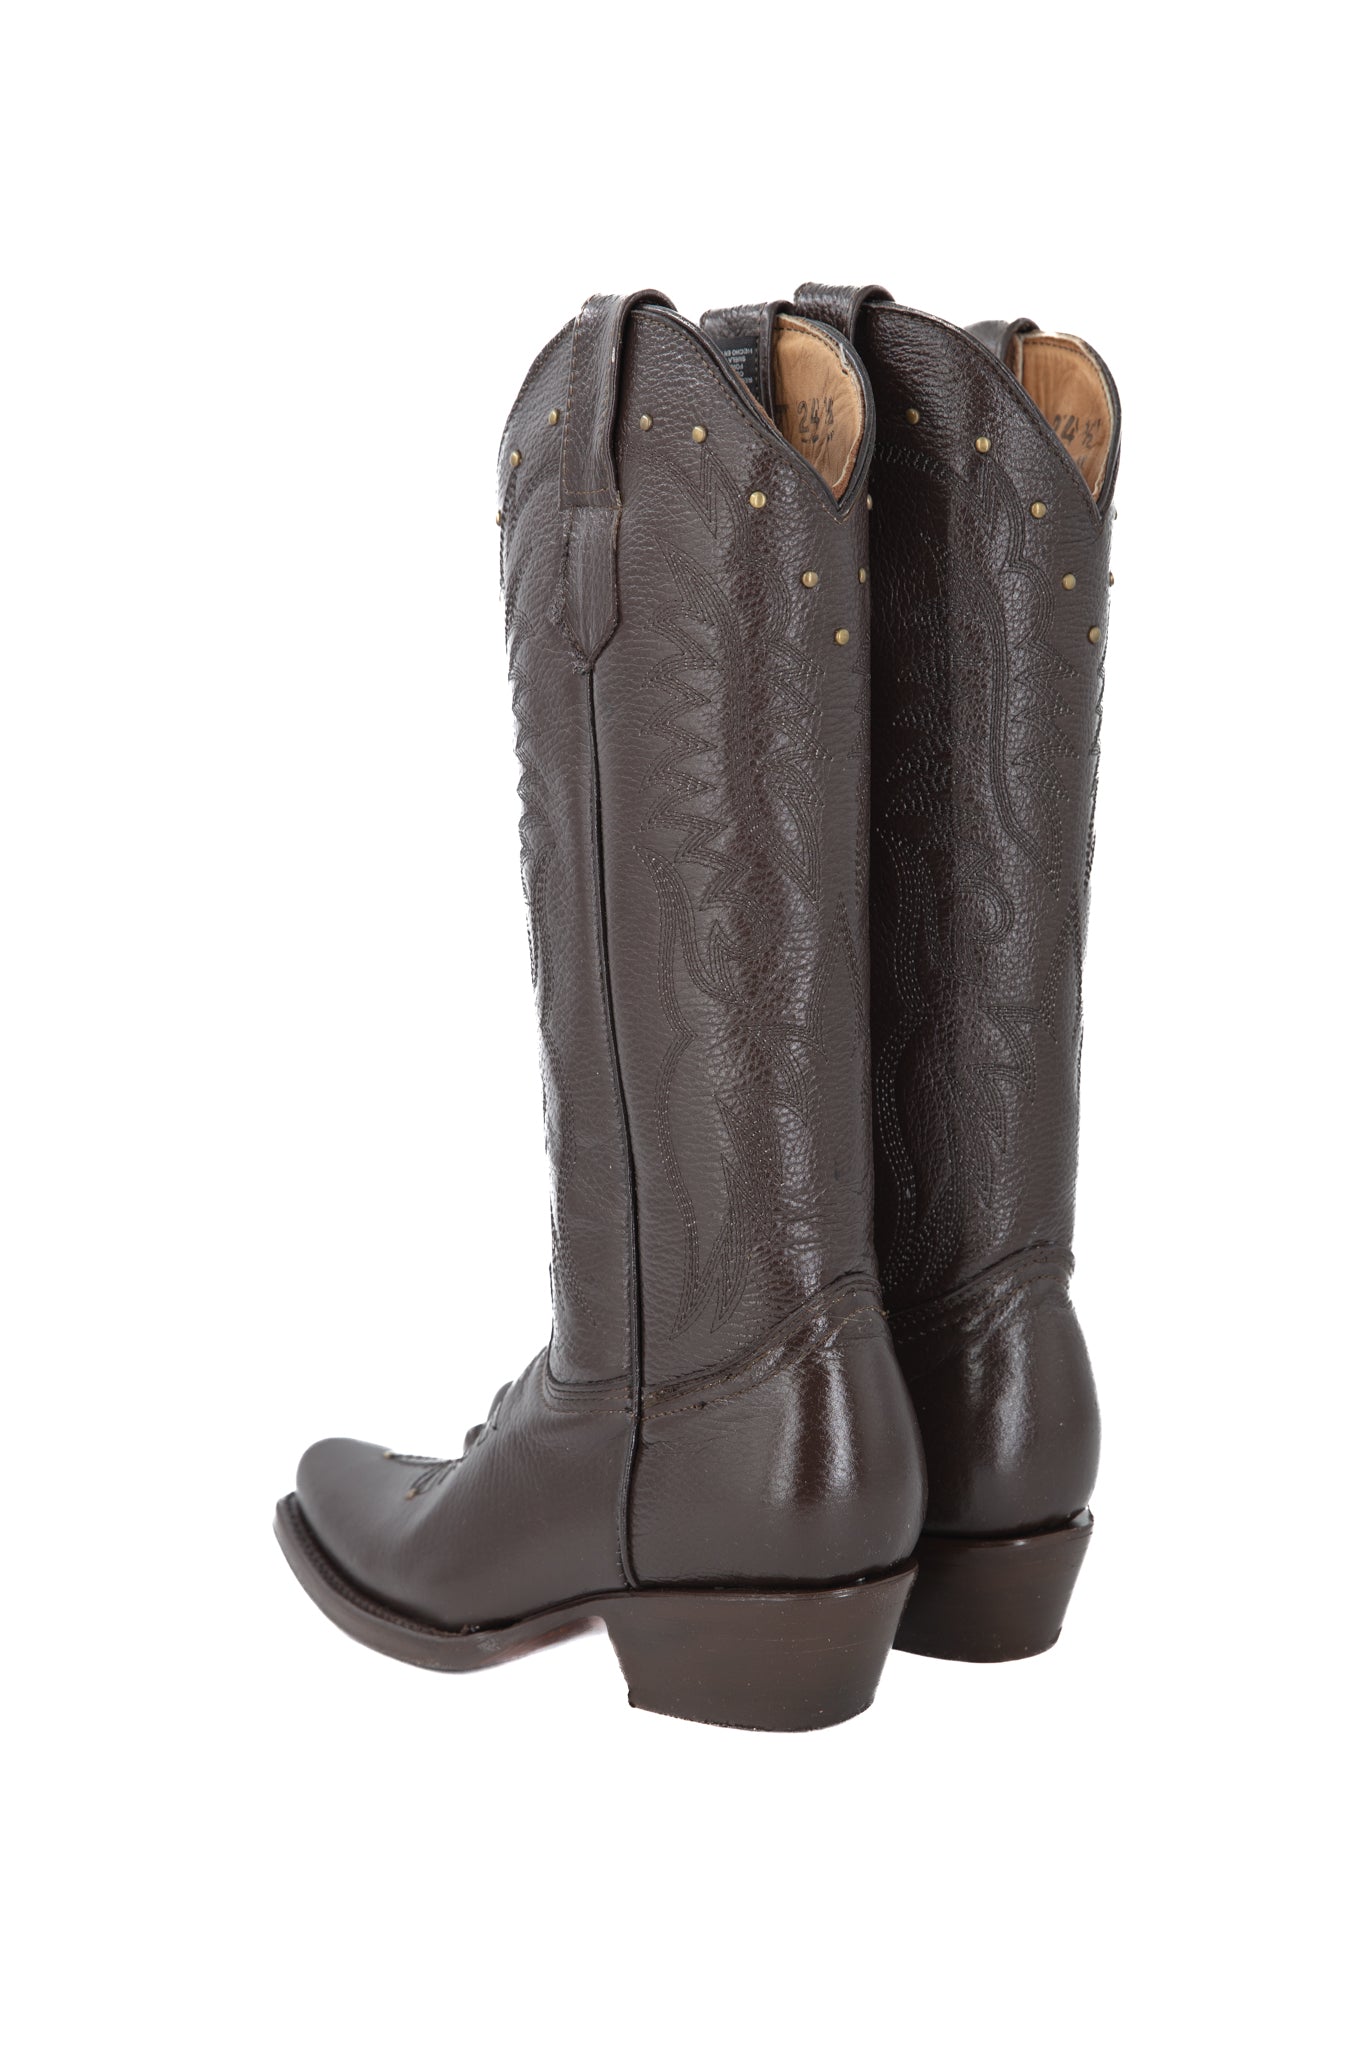 The Tania Country Tall Cowgirl Boot